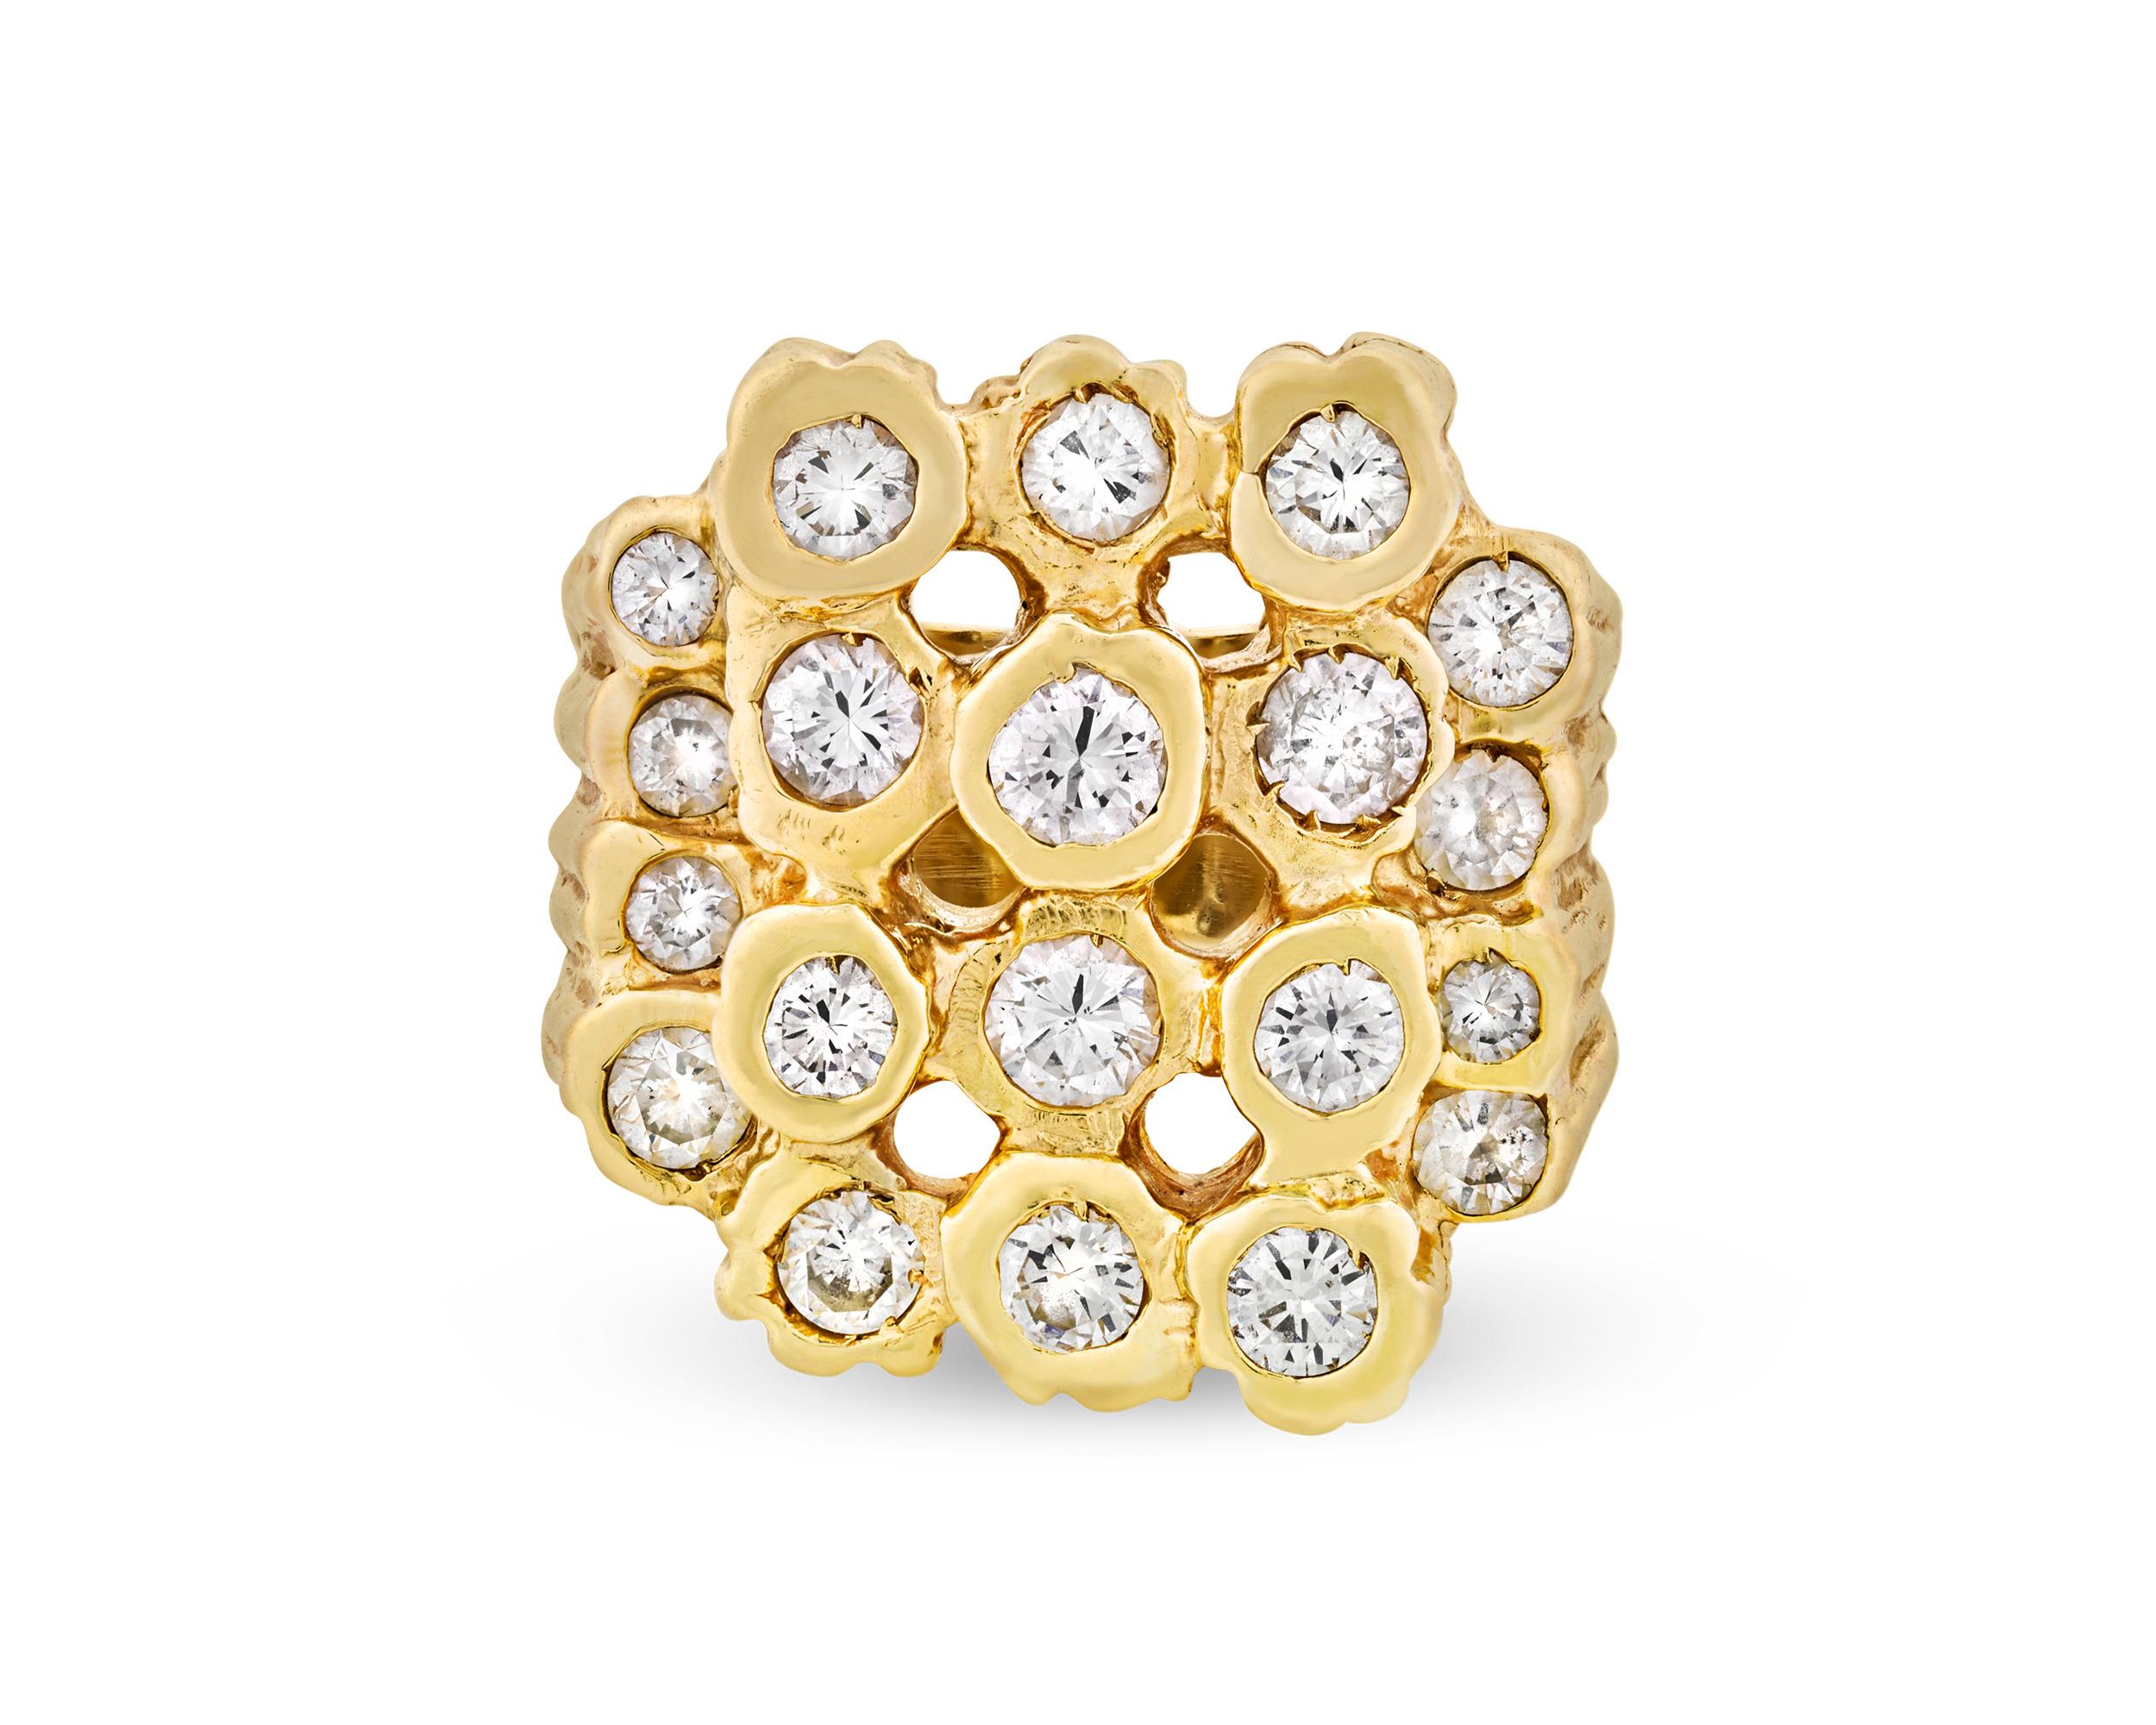 This fascinating ring was owned and worn by perhaps the most celebrated cultural icon of the 20th century, the King himself, Elvis Presley. The jewelry creation features 20 sparkling white diamonds, and the gems are surrounded by a 14K yellow gold